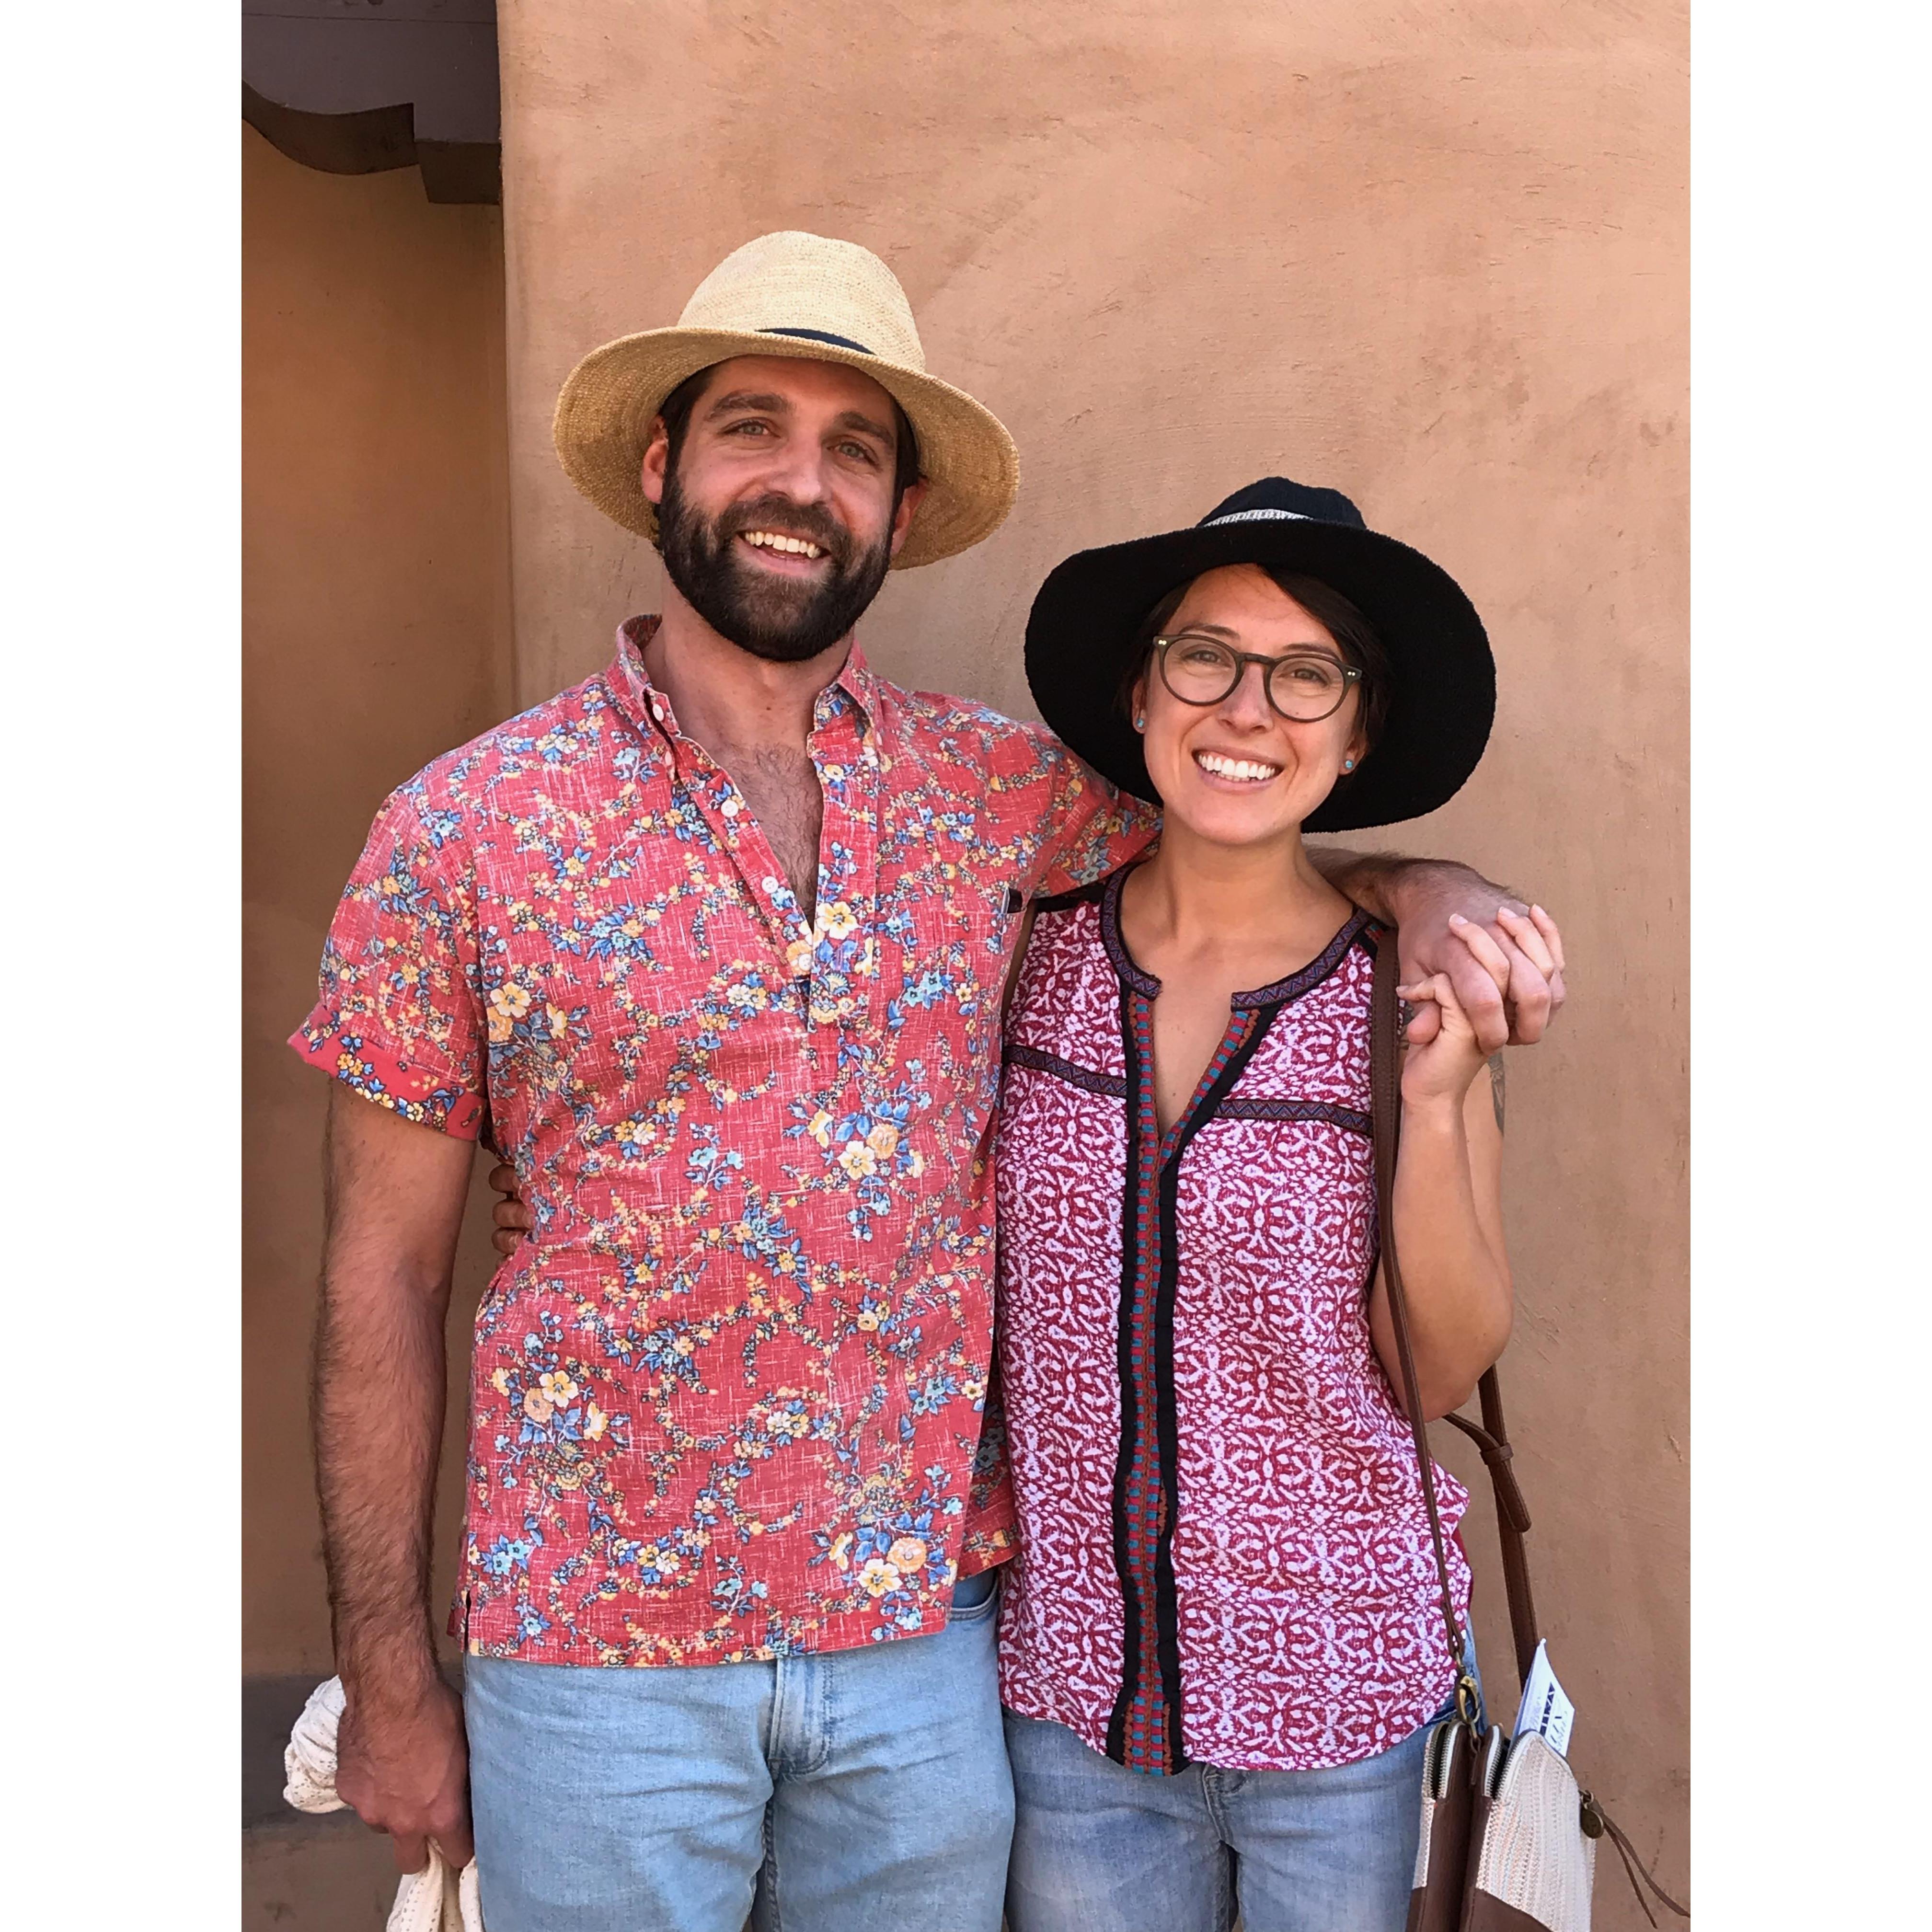 Sante Fe, April 2018- Van visiting Meg while working at the Navajo reservation (birthplace of pictured adventure hats)